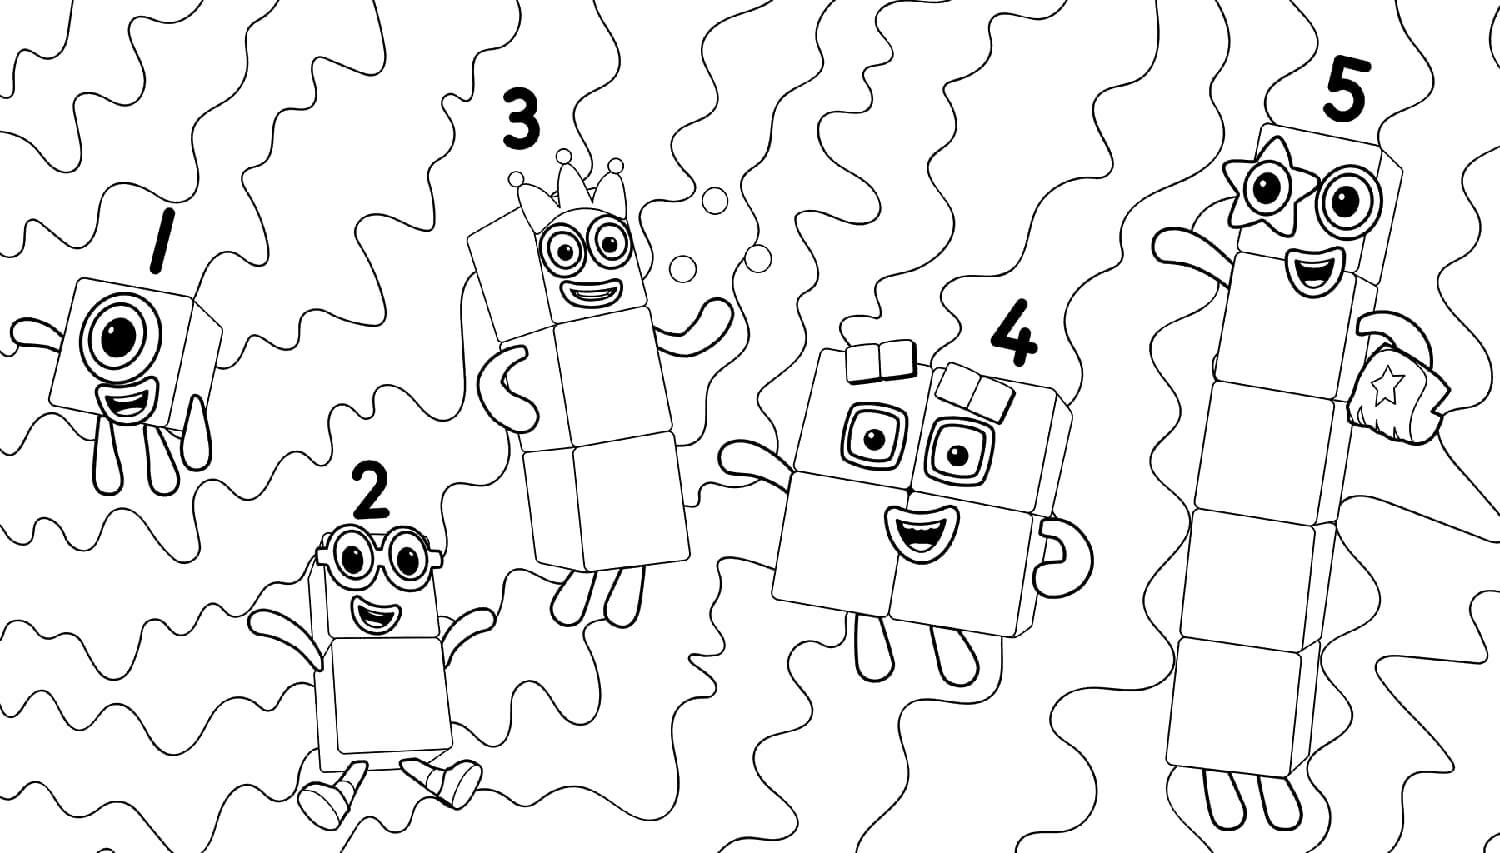 Numberblocks 1 Coloring Page - Free Printable Coloring Pages for Kids